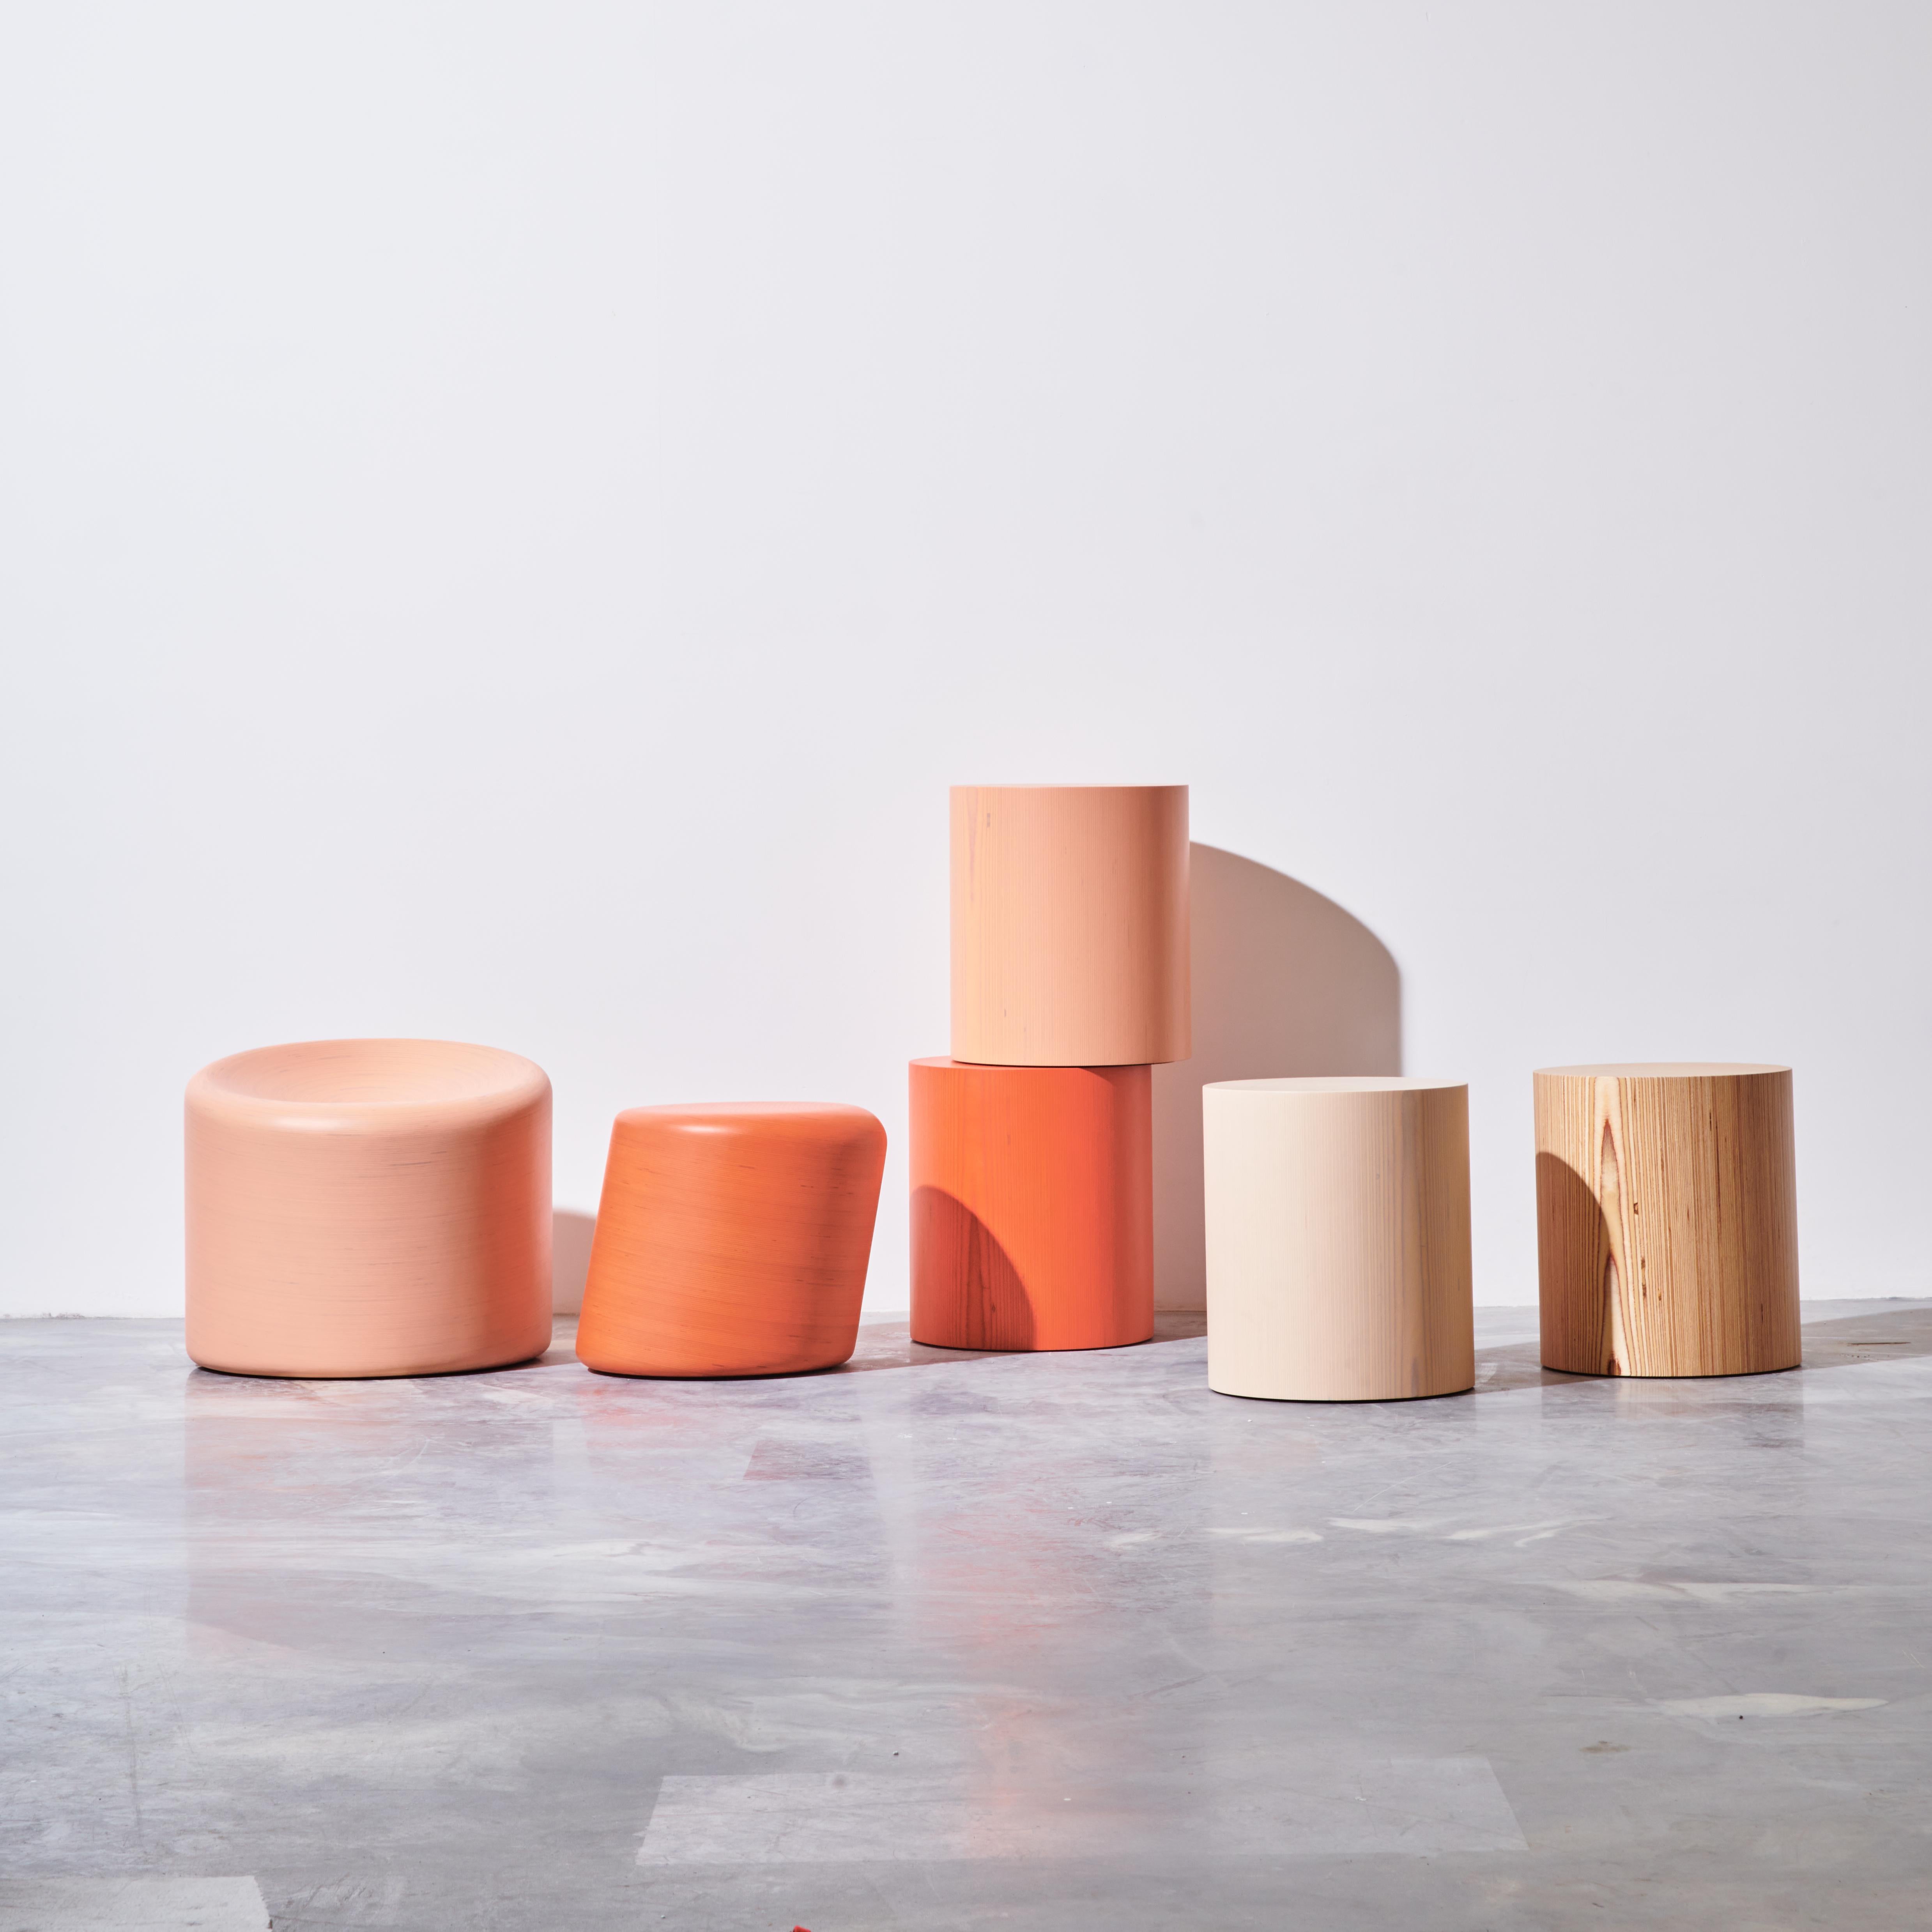 The stack seat. A stack laminated FSC Baltic Birch plywood cylinder, rotated forward with a concave seat scoop; an expression of the ergonomics of sitting in pure form. Color Pictured: Peach. 

Item available for immediate delivery.

This design is